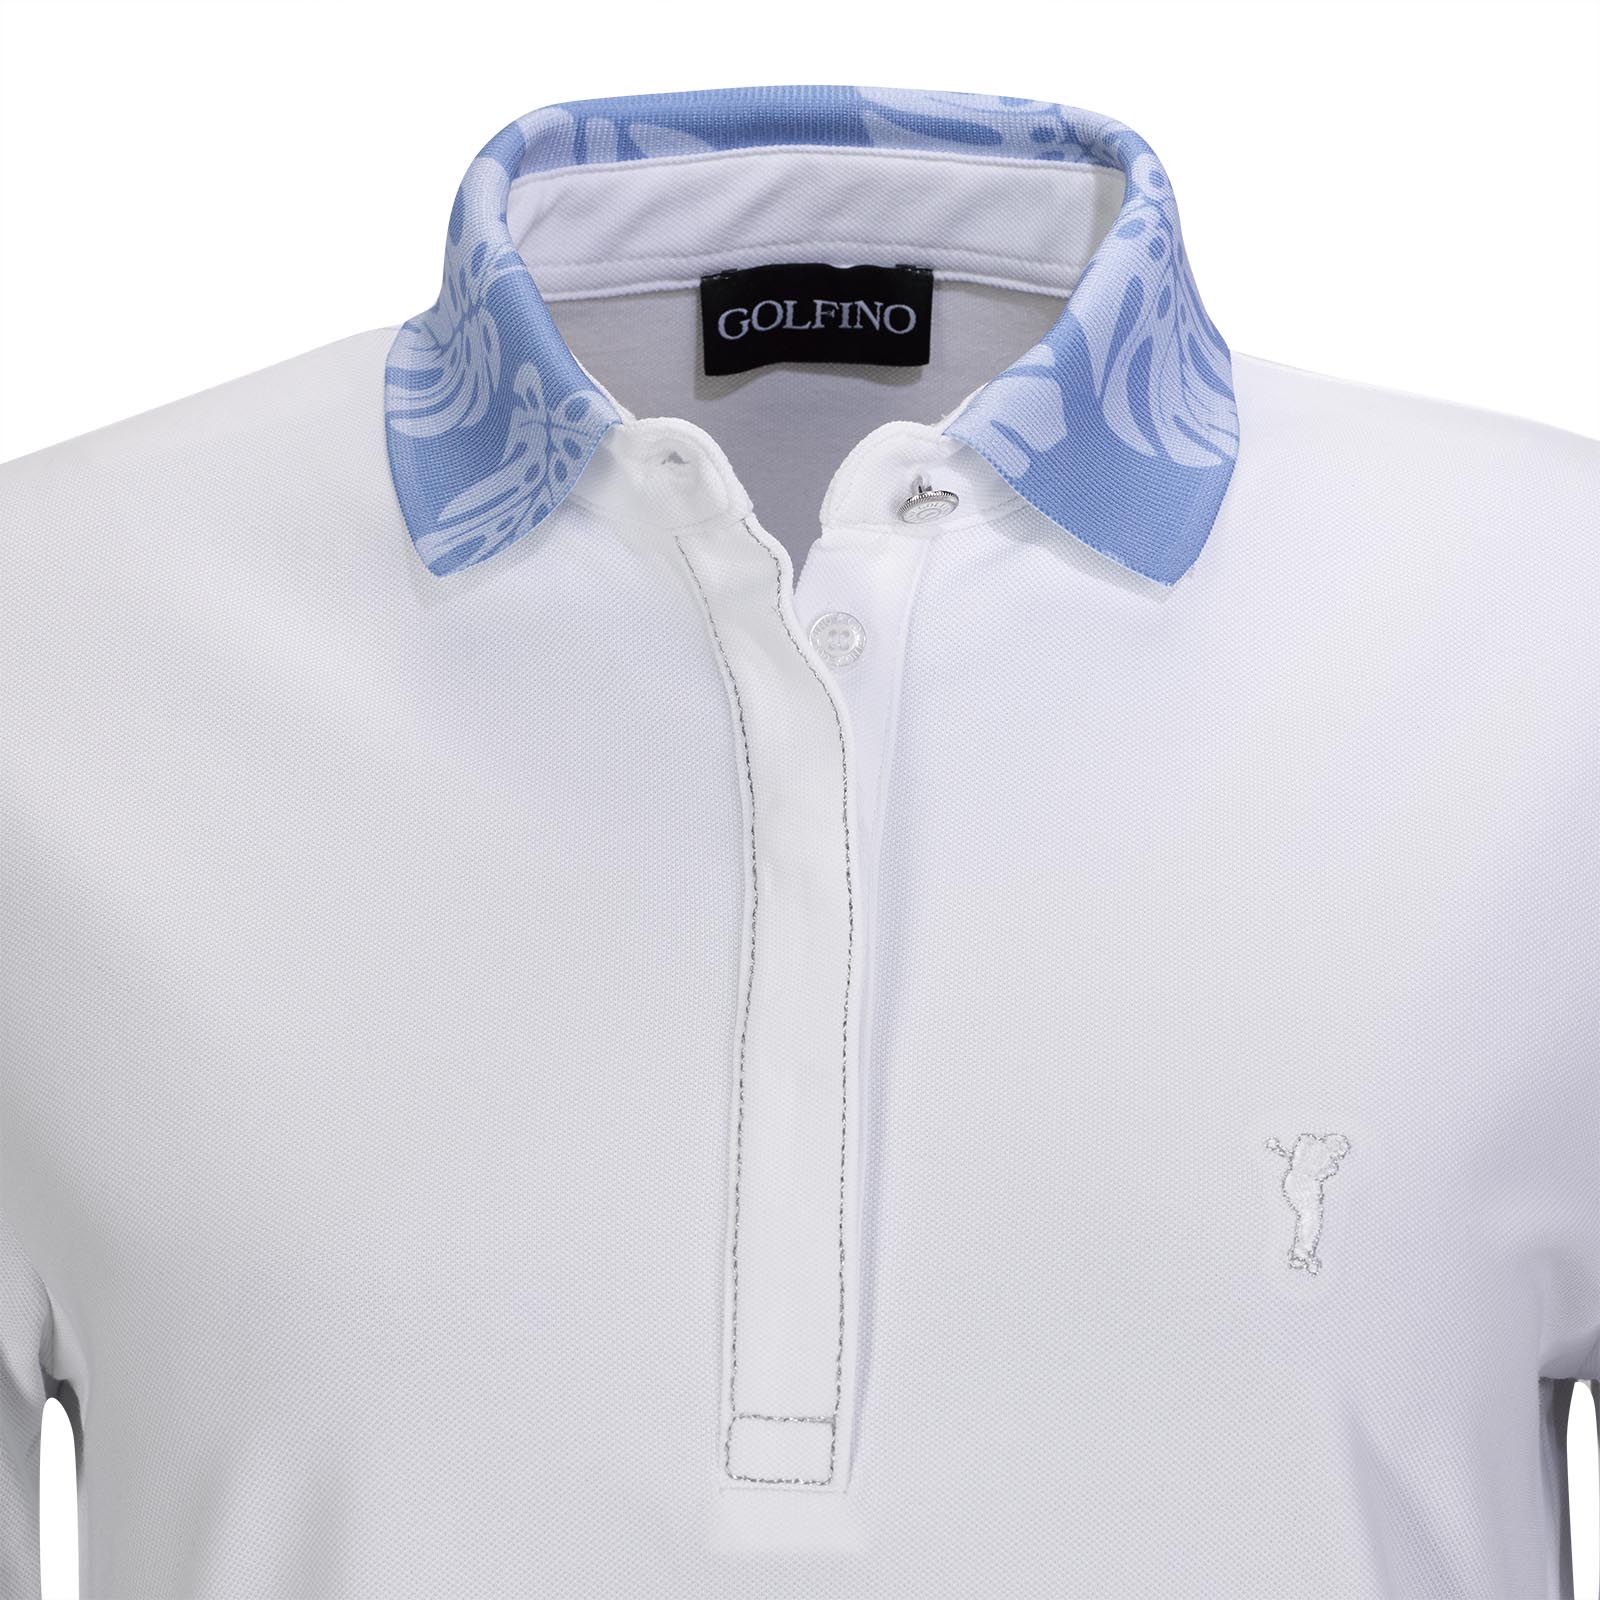 Palm Beach dame golfpolo med Sun Protection og stretchfunktion.